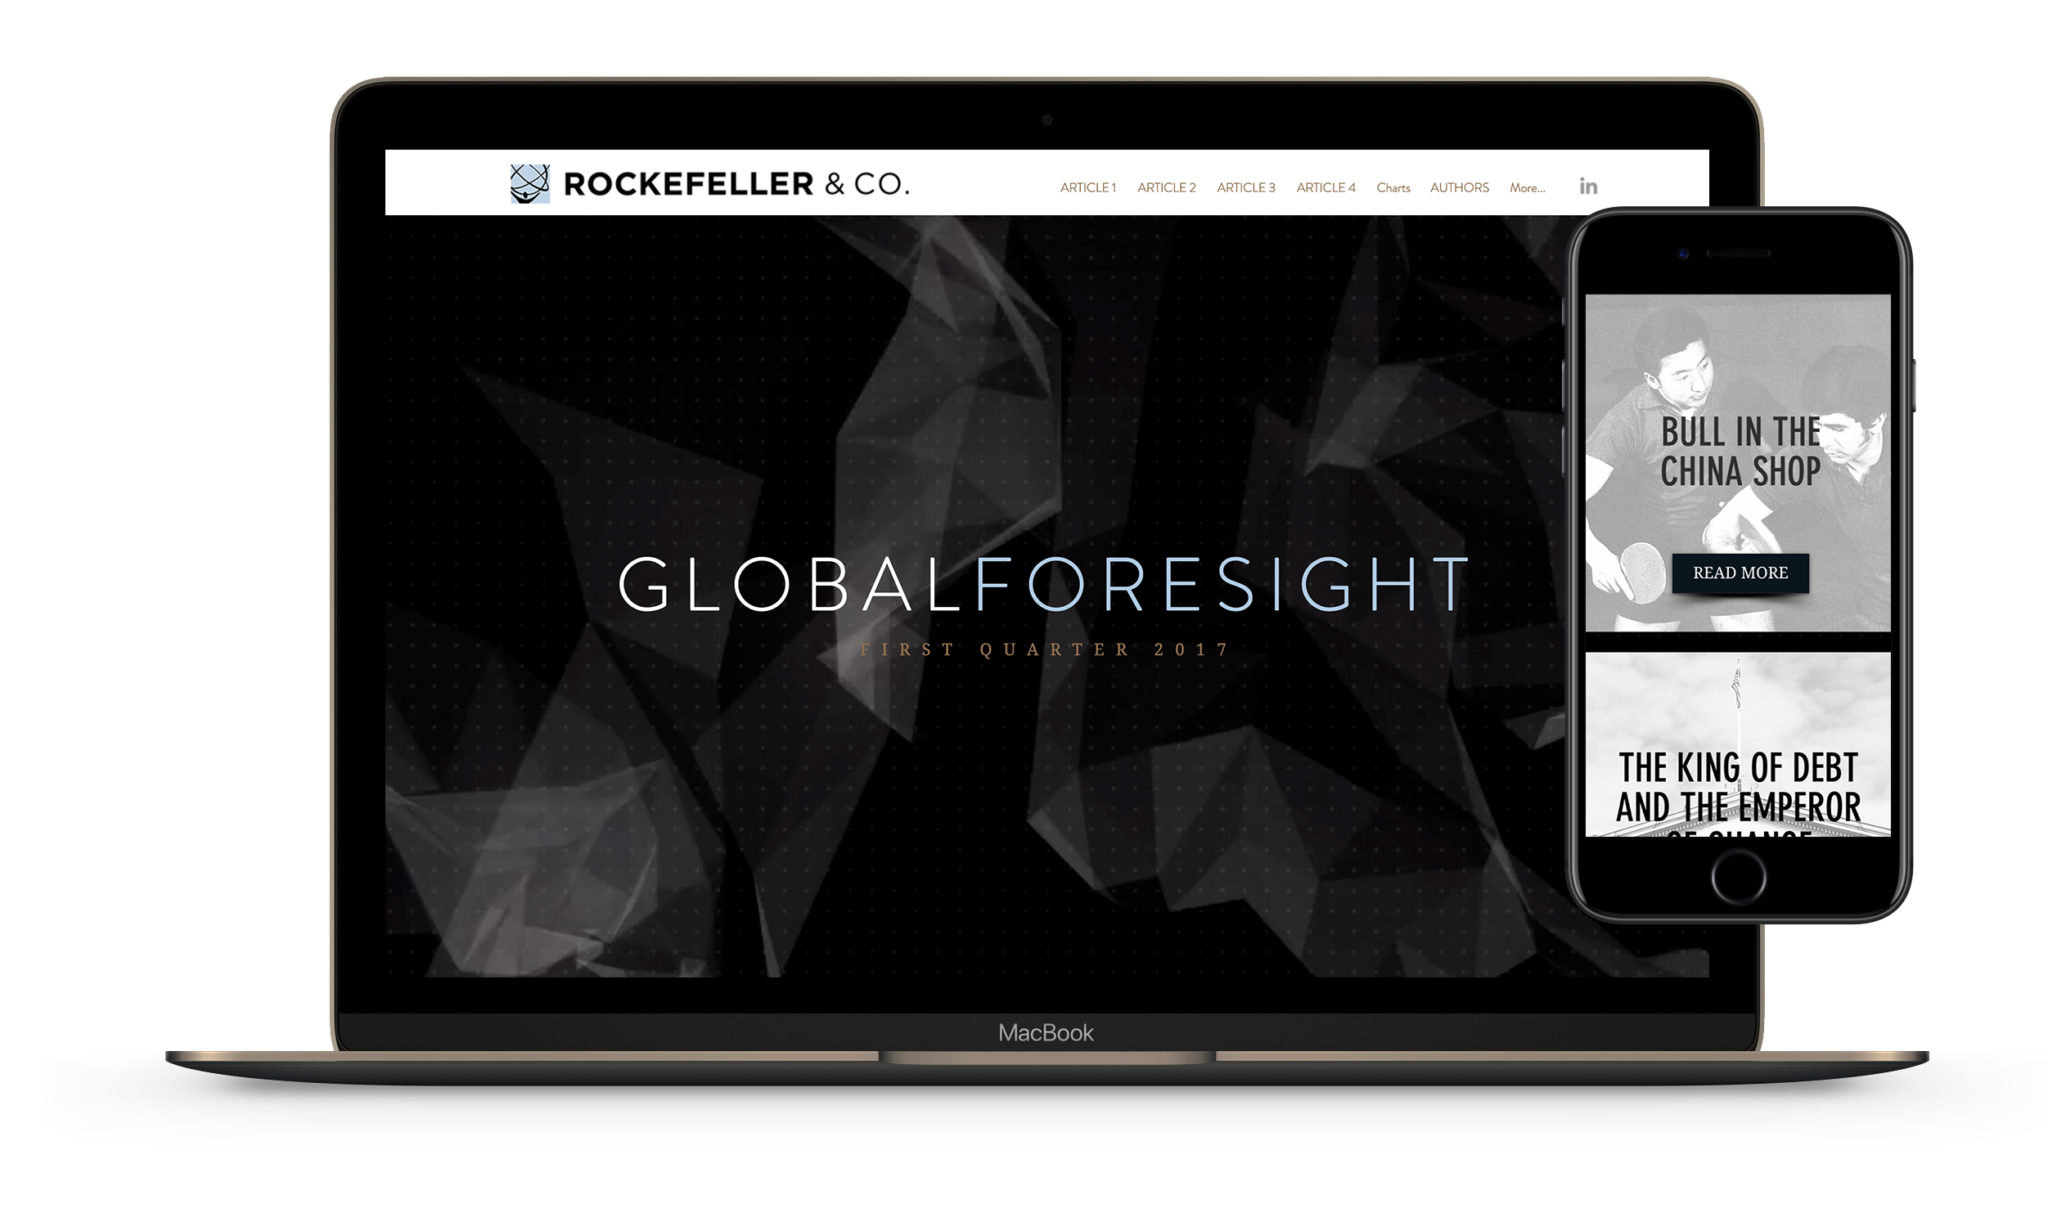 A mockup of the Rockefeller & Co website, shown on a MacBook and mobile device.